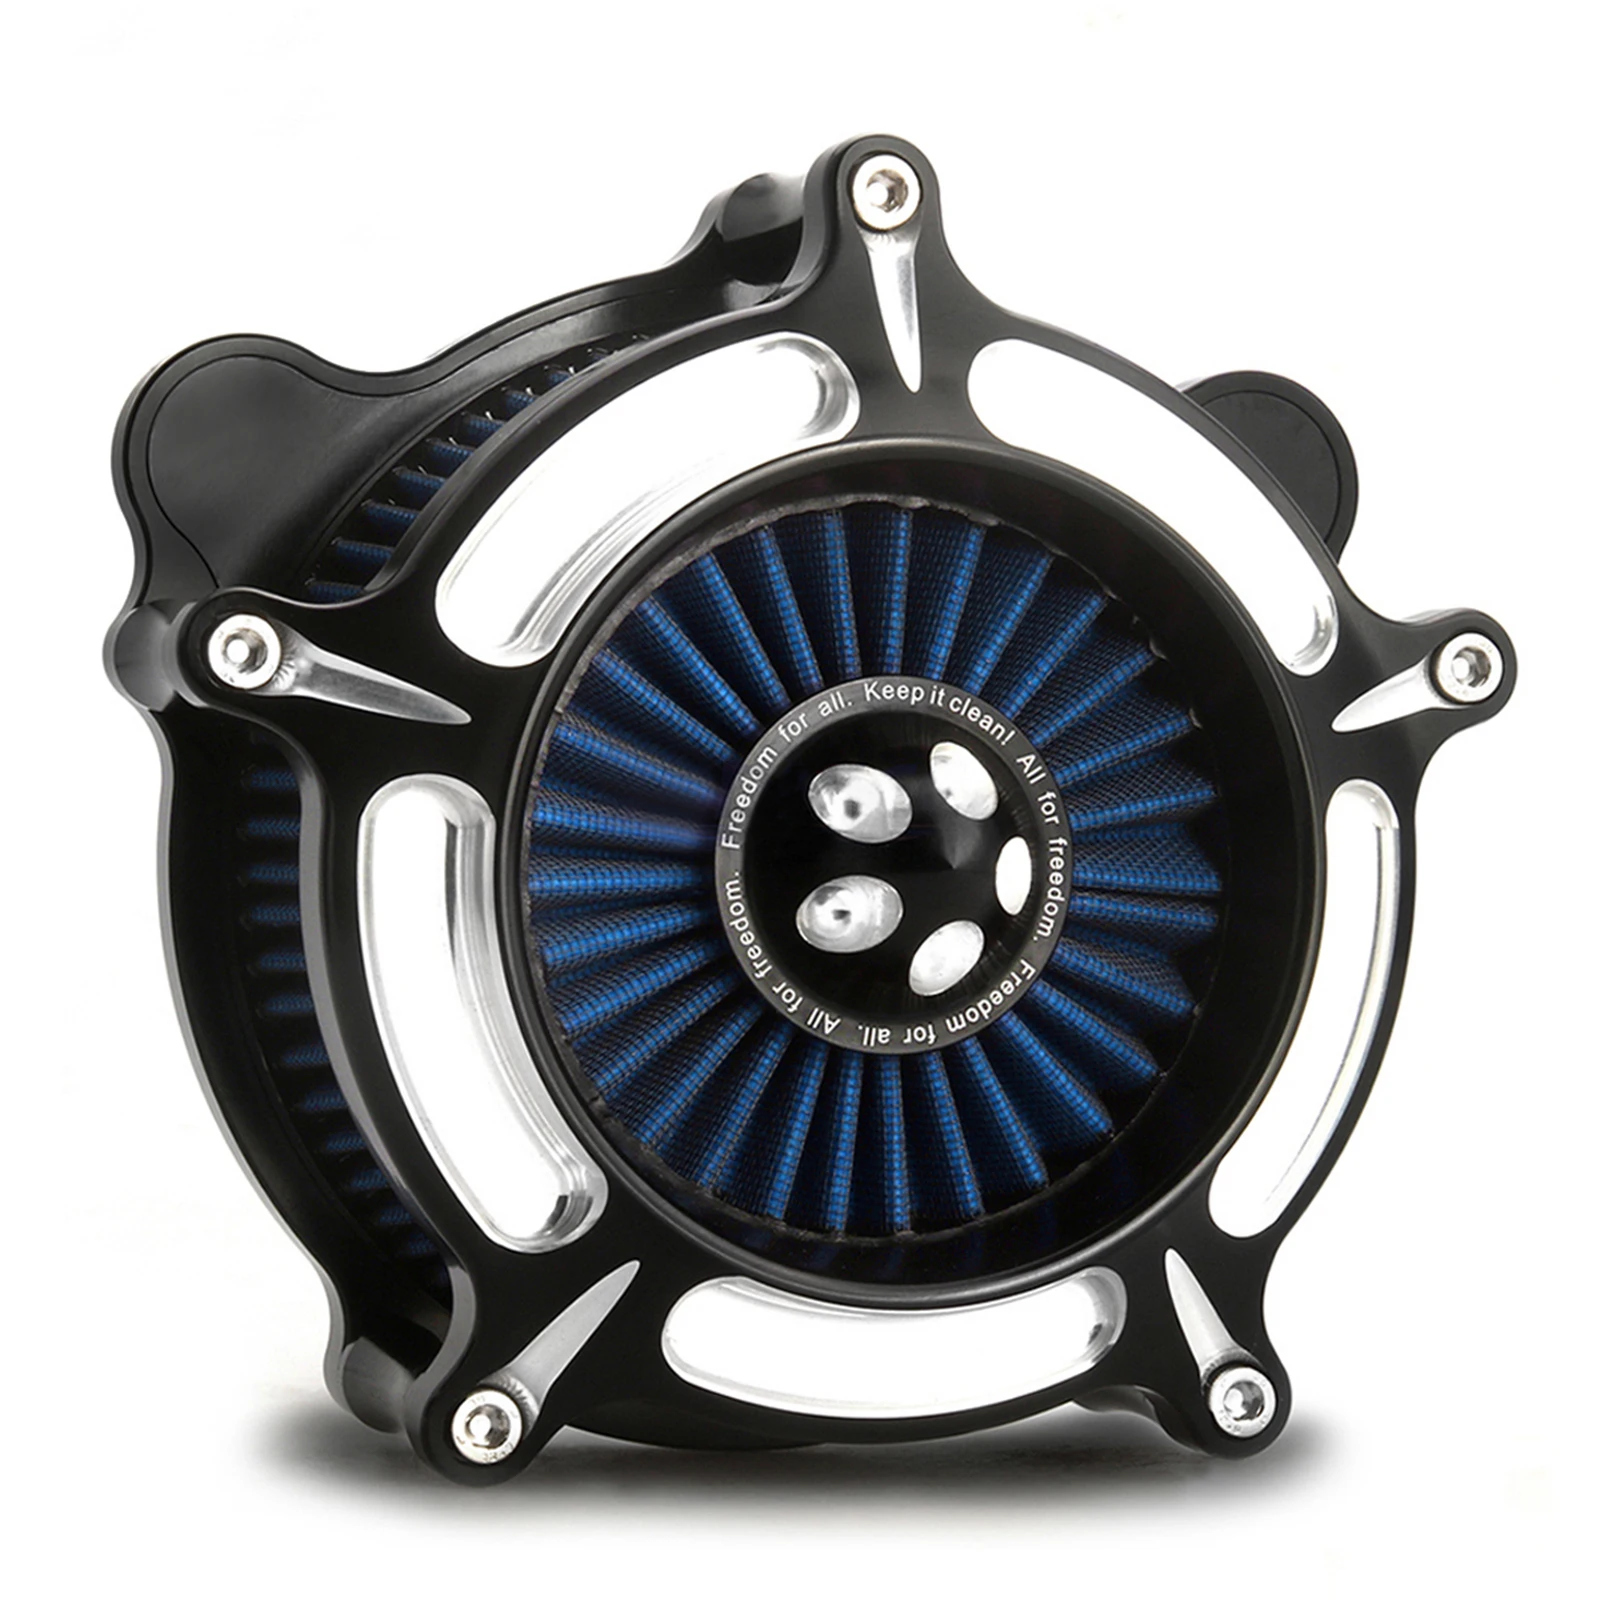 

BLUE filter CNC Contrast Cut spike Turbine Air Cleaner intake For Harley Touring Softail Dyna Sportster 1200 883 Forty Eight